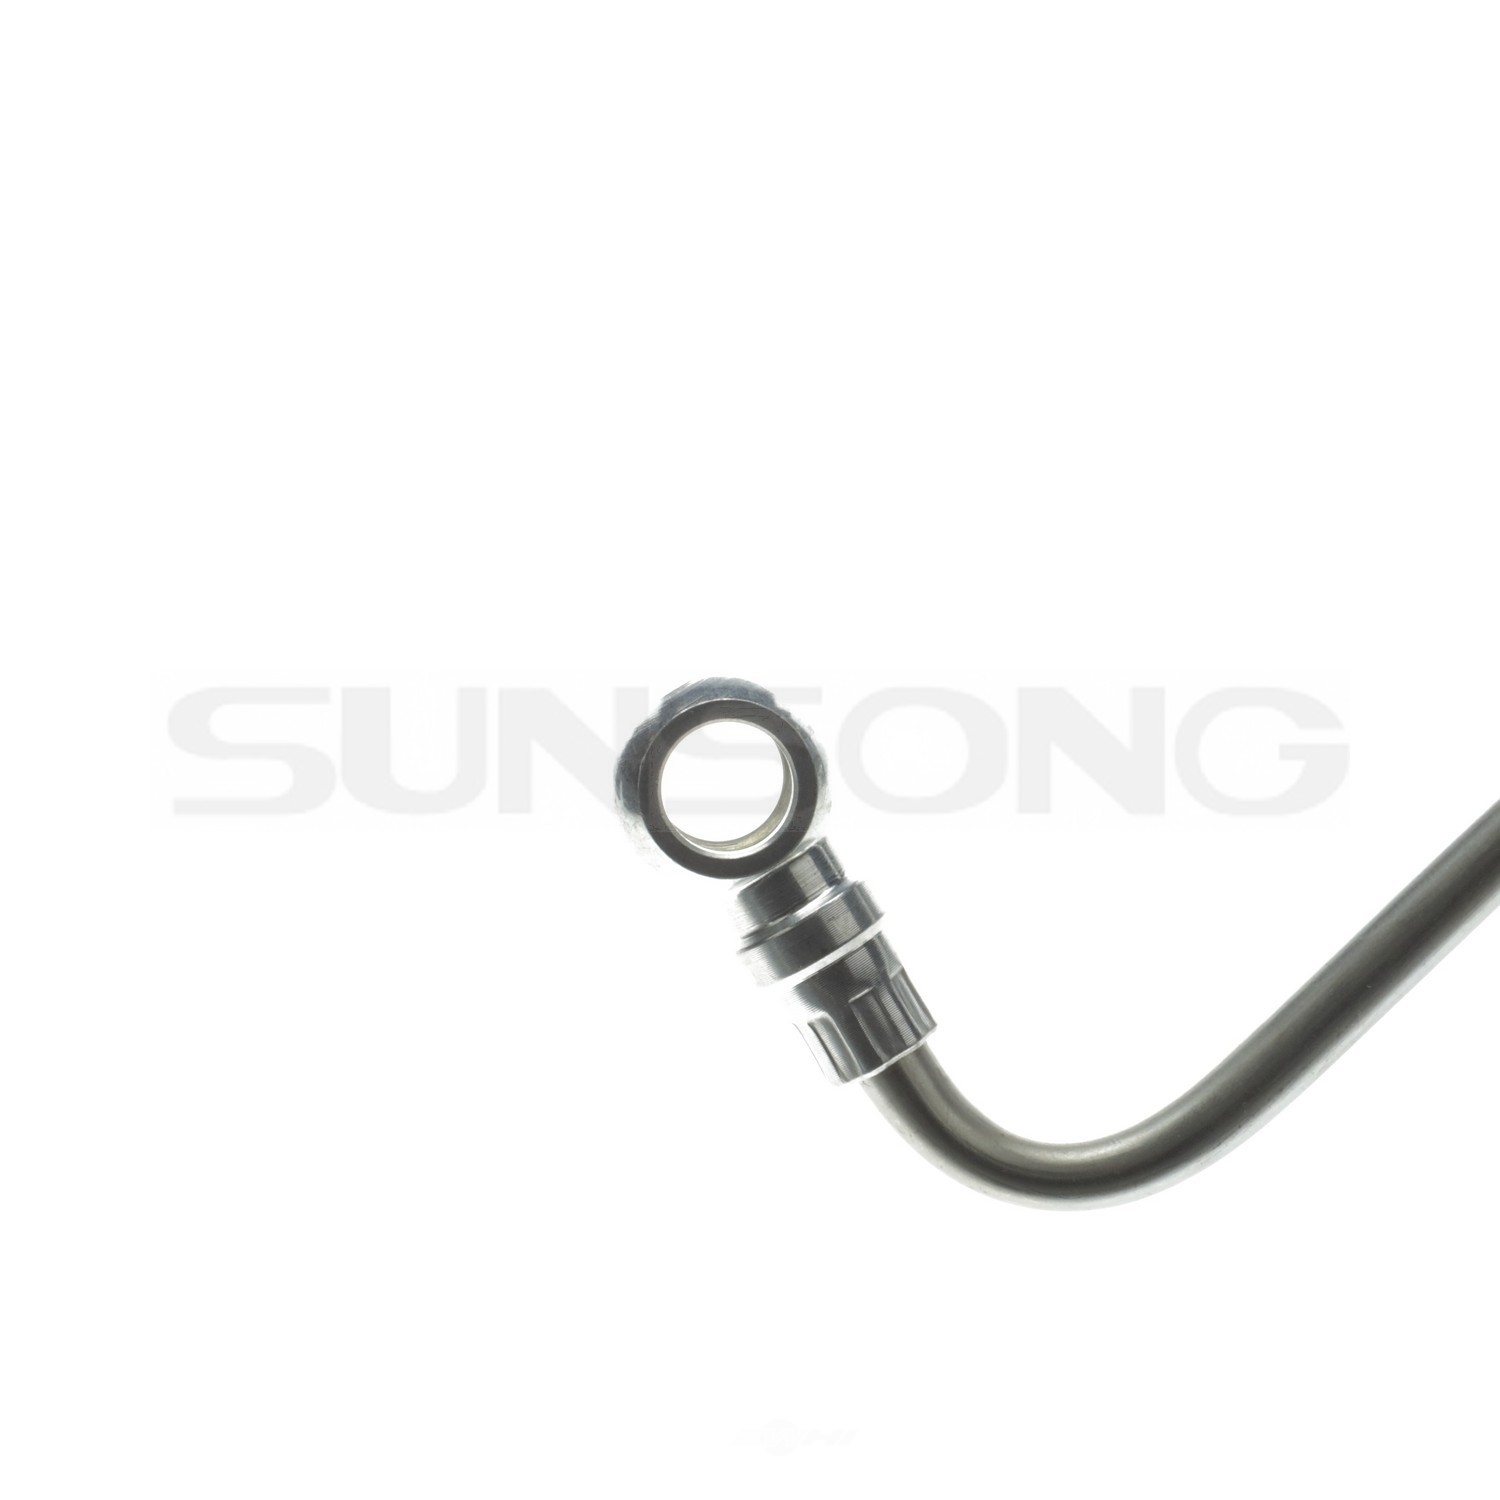 SUNSONG NORTH AMERICA - Engine Oil Cooler Hose Assembly - SUG 5801366